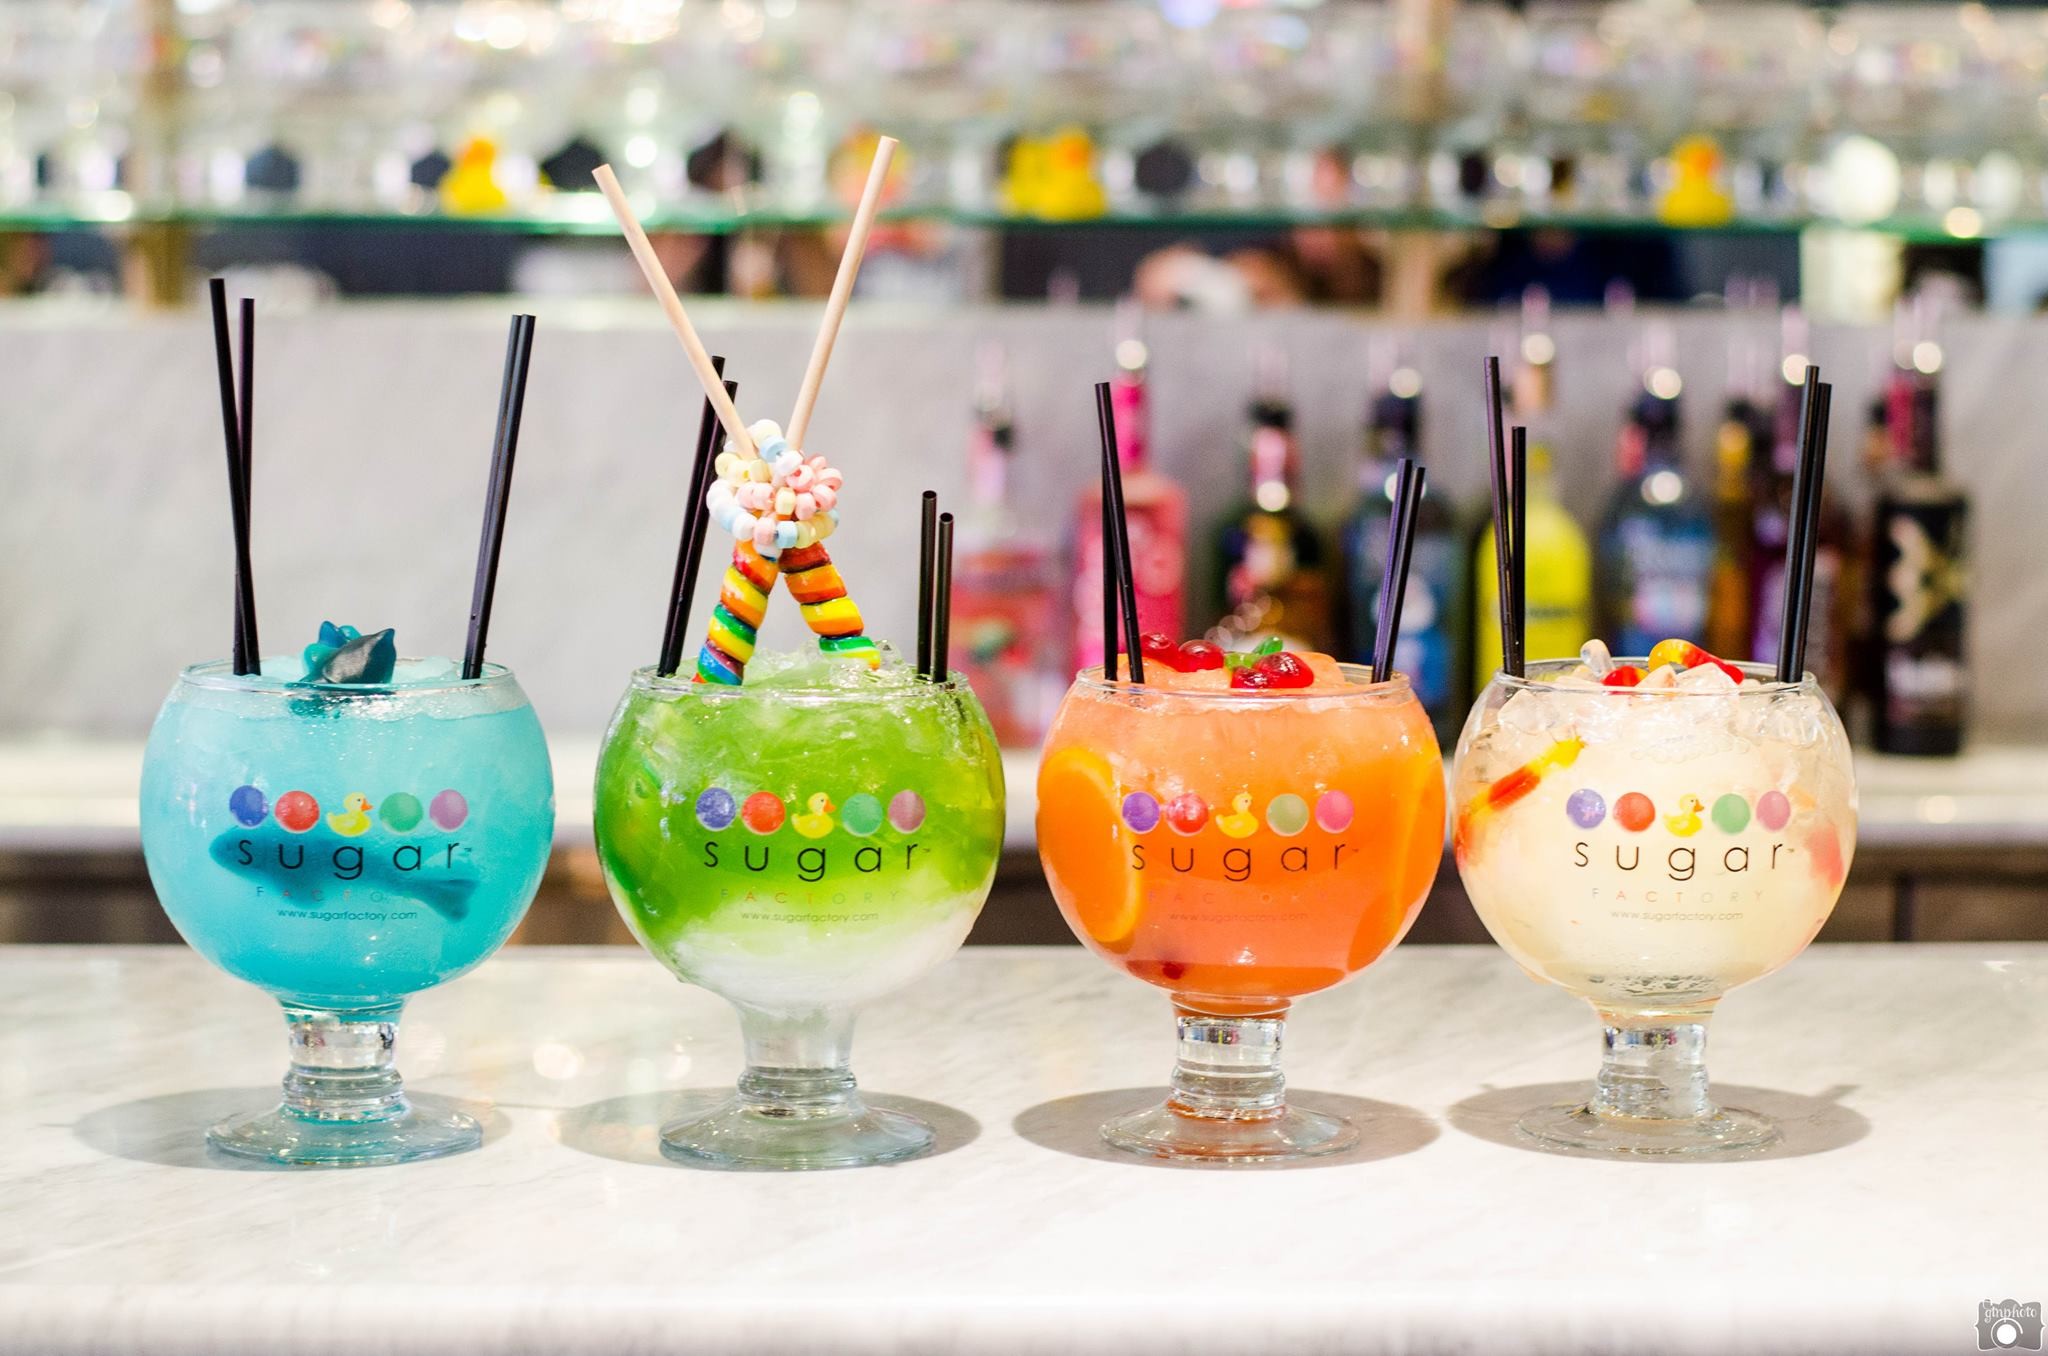 Sugar Factory announces opening date for Detroit location and is taking